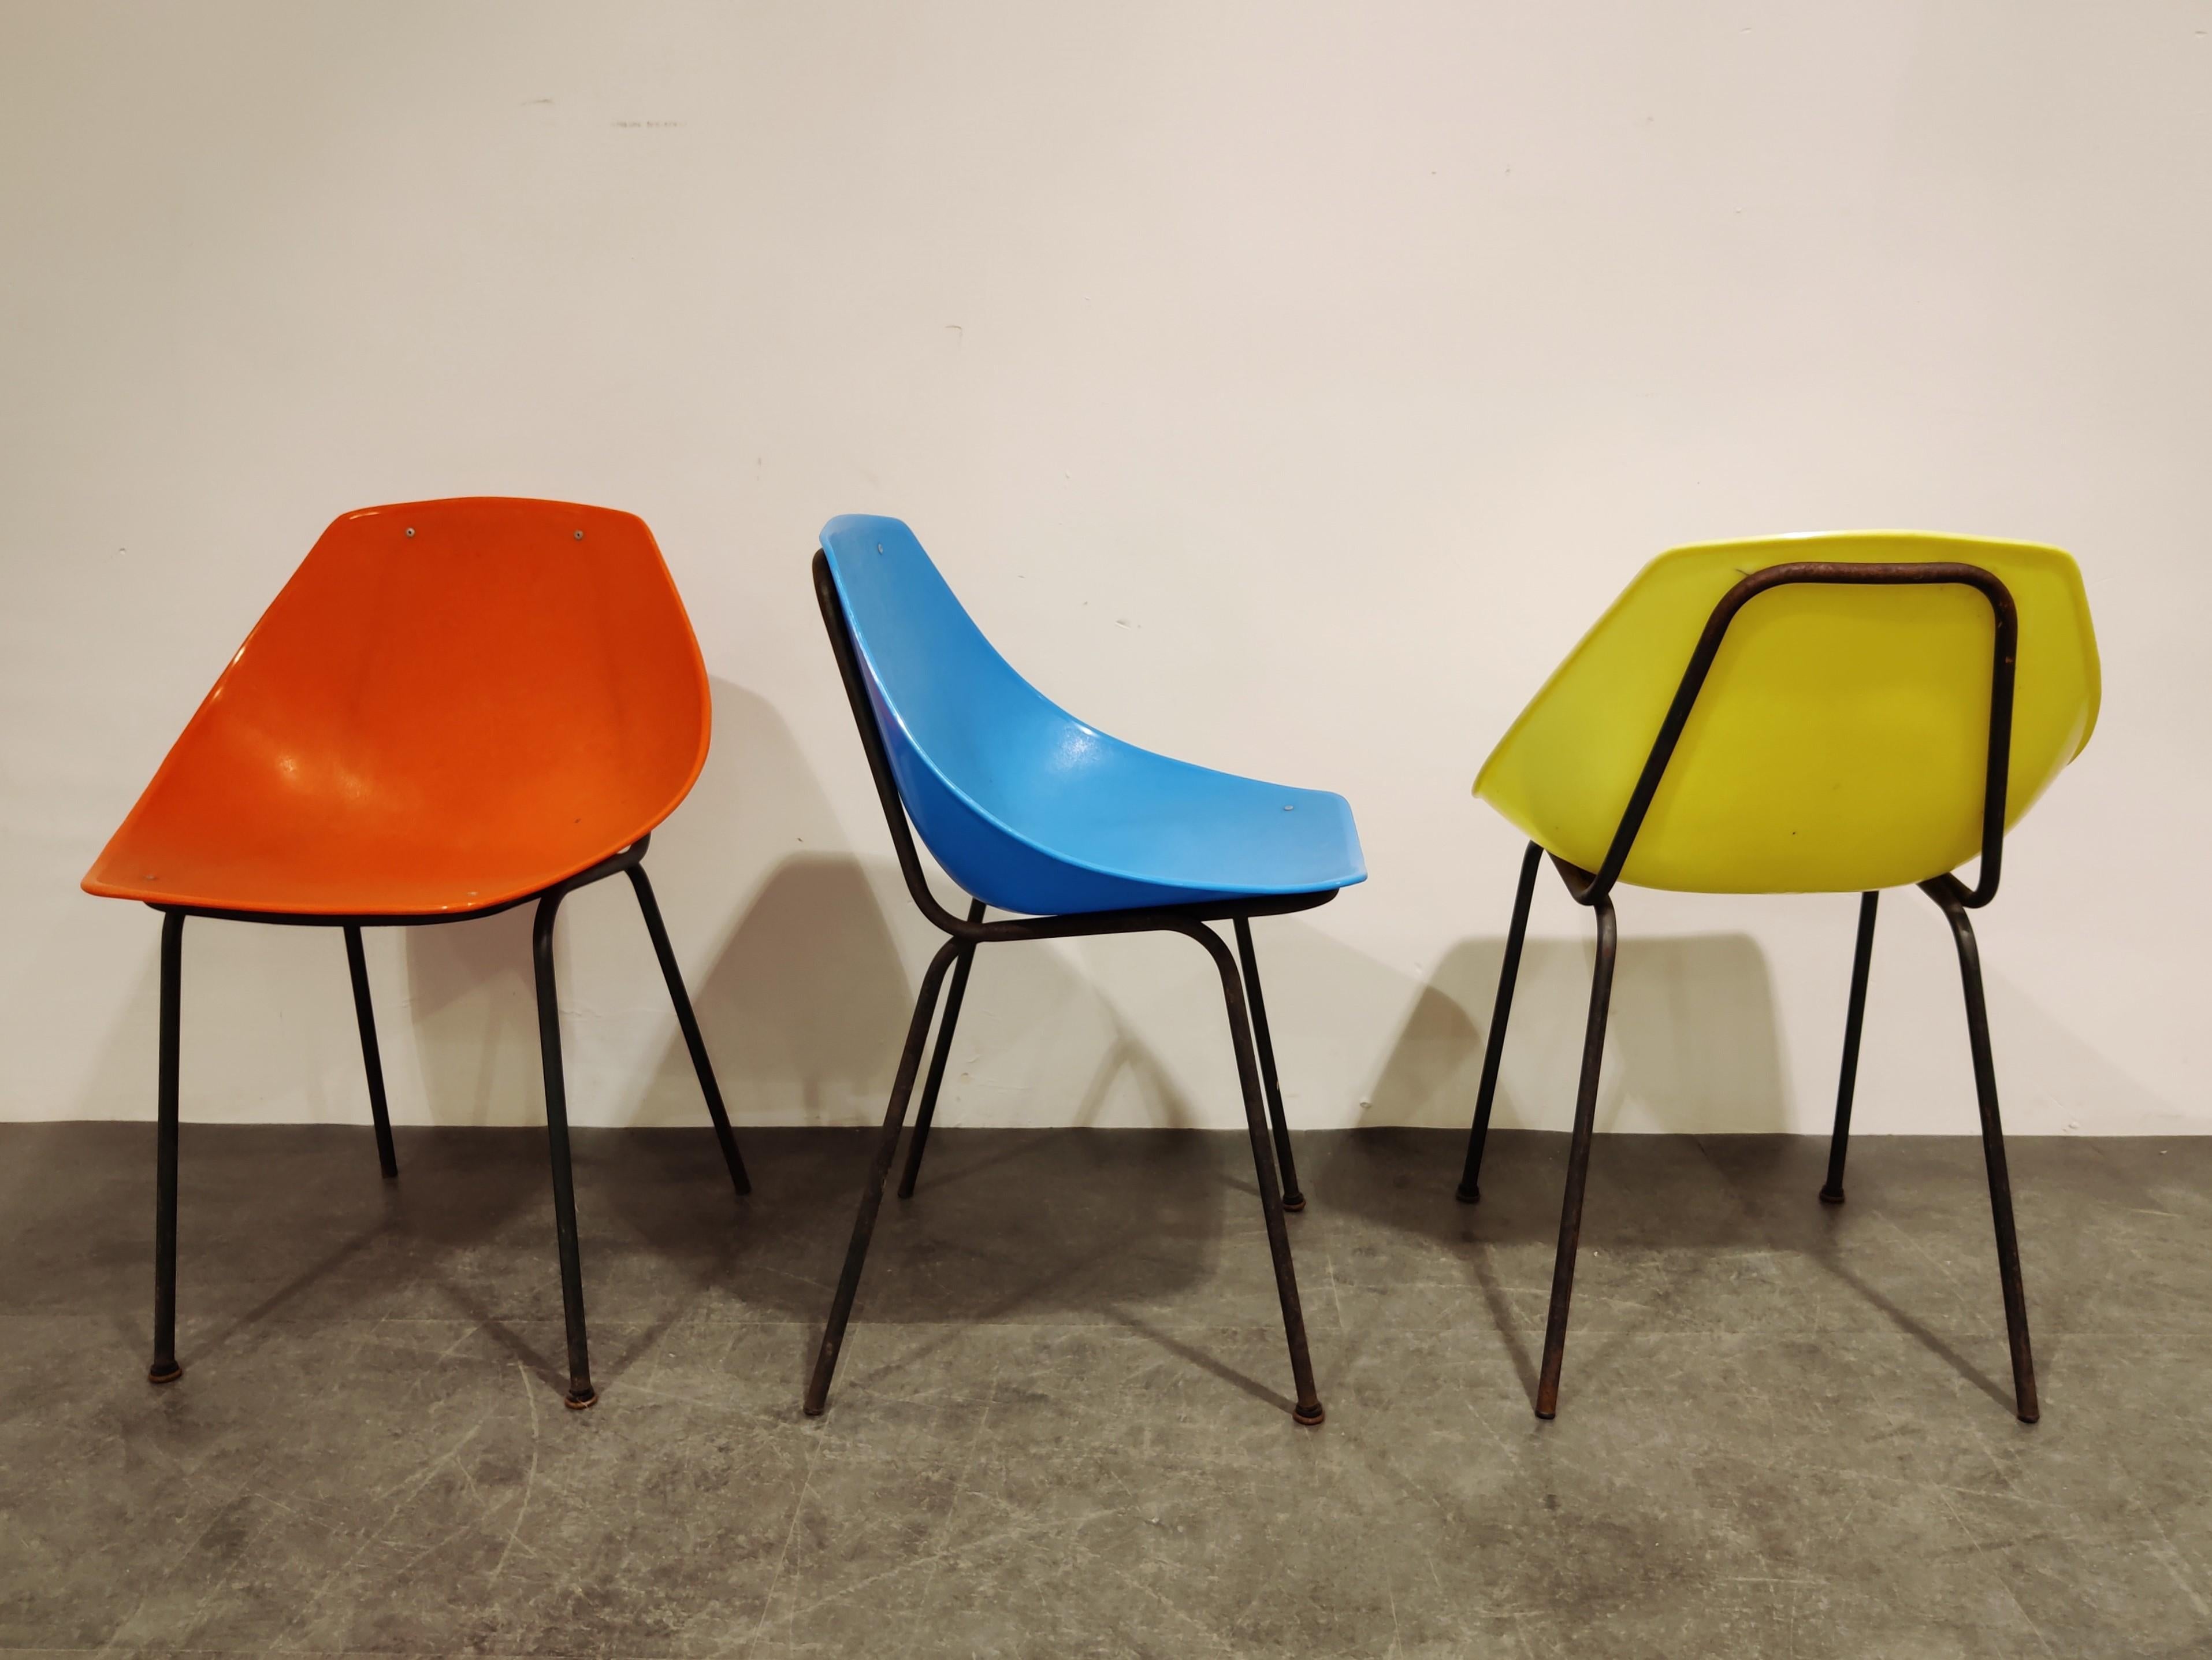 Set of 3 vintage coquillage chairs by French designer Pierre Guariche for Meurop.

This colorful set of chairs is made from a plastic shell mounted on an elegant black metal base

The color of the chairs has been kept very well, no discoloring